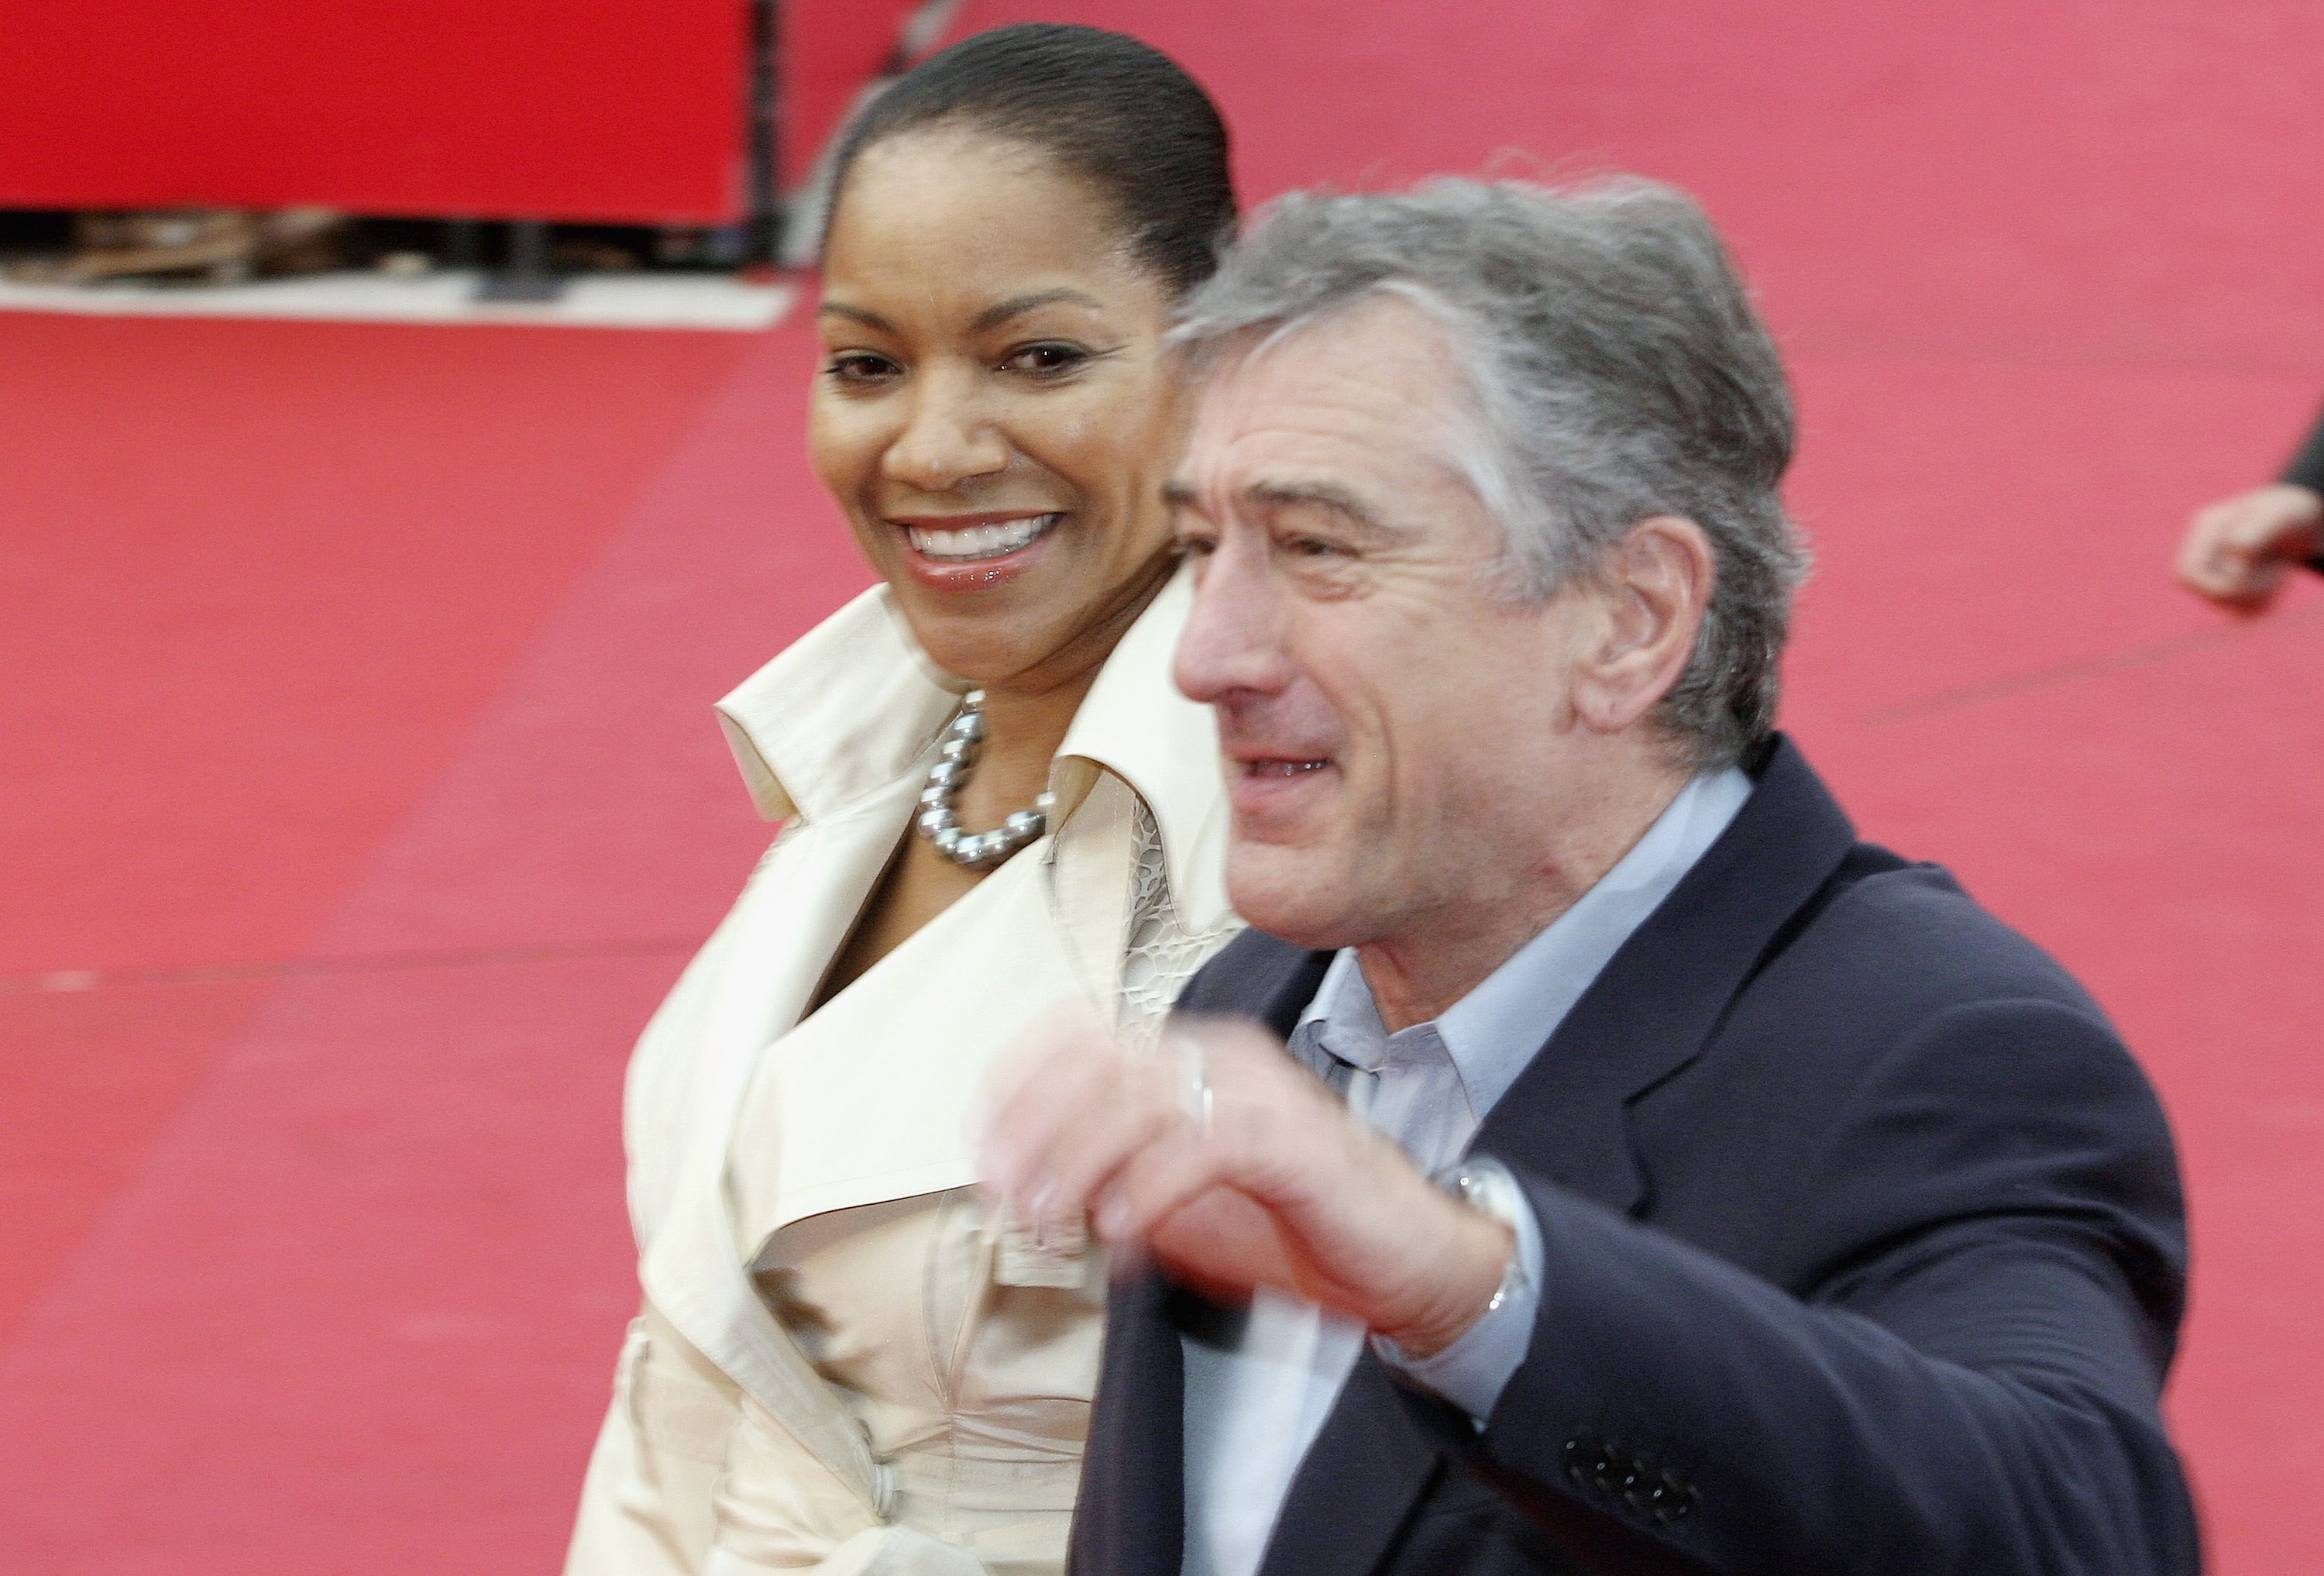 Robert De Niro and Grace Hightower attending a red carpet on the closing day of Rome Film Festival on October 21, 2006 in Rome, Italy | Source: Getty Images